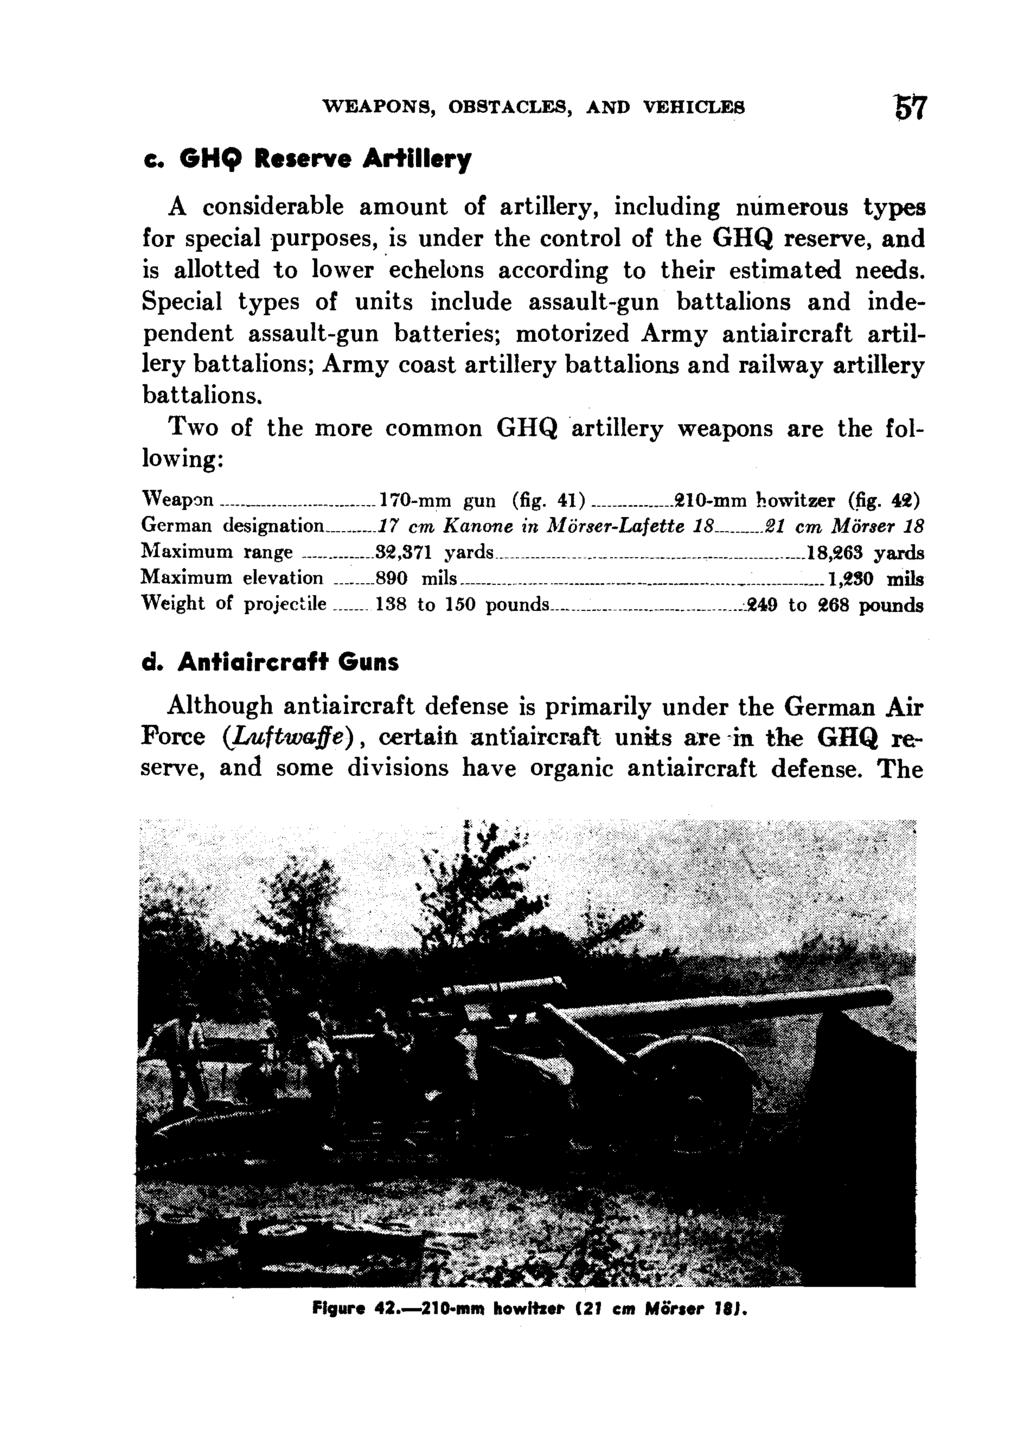 c. GHQ Reserve Artillery WEAPONS, OBSTACLES, AND VEHICLES -7 A considerable amount of artillery, including numerous types for special purposes, is under the control of the GHQ reserve, and is